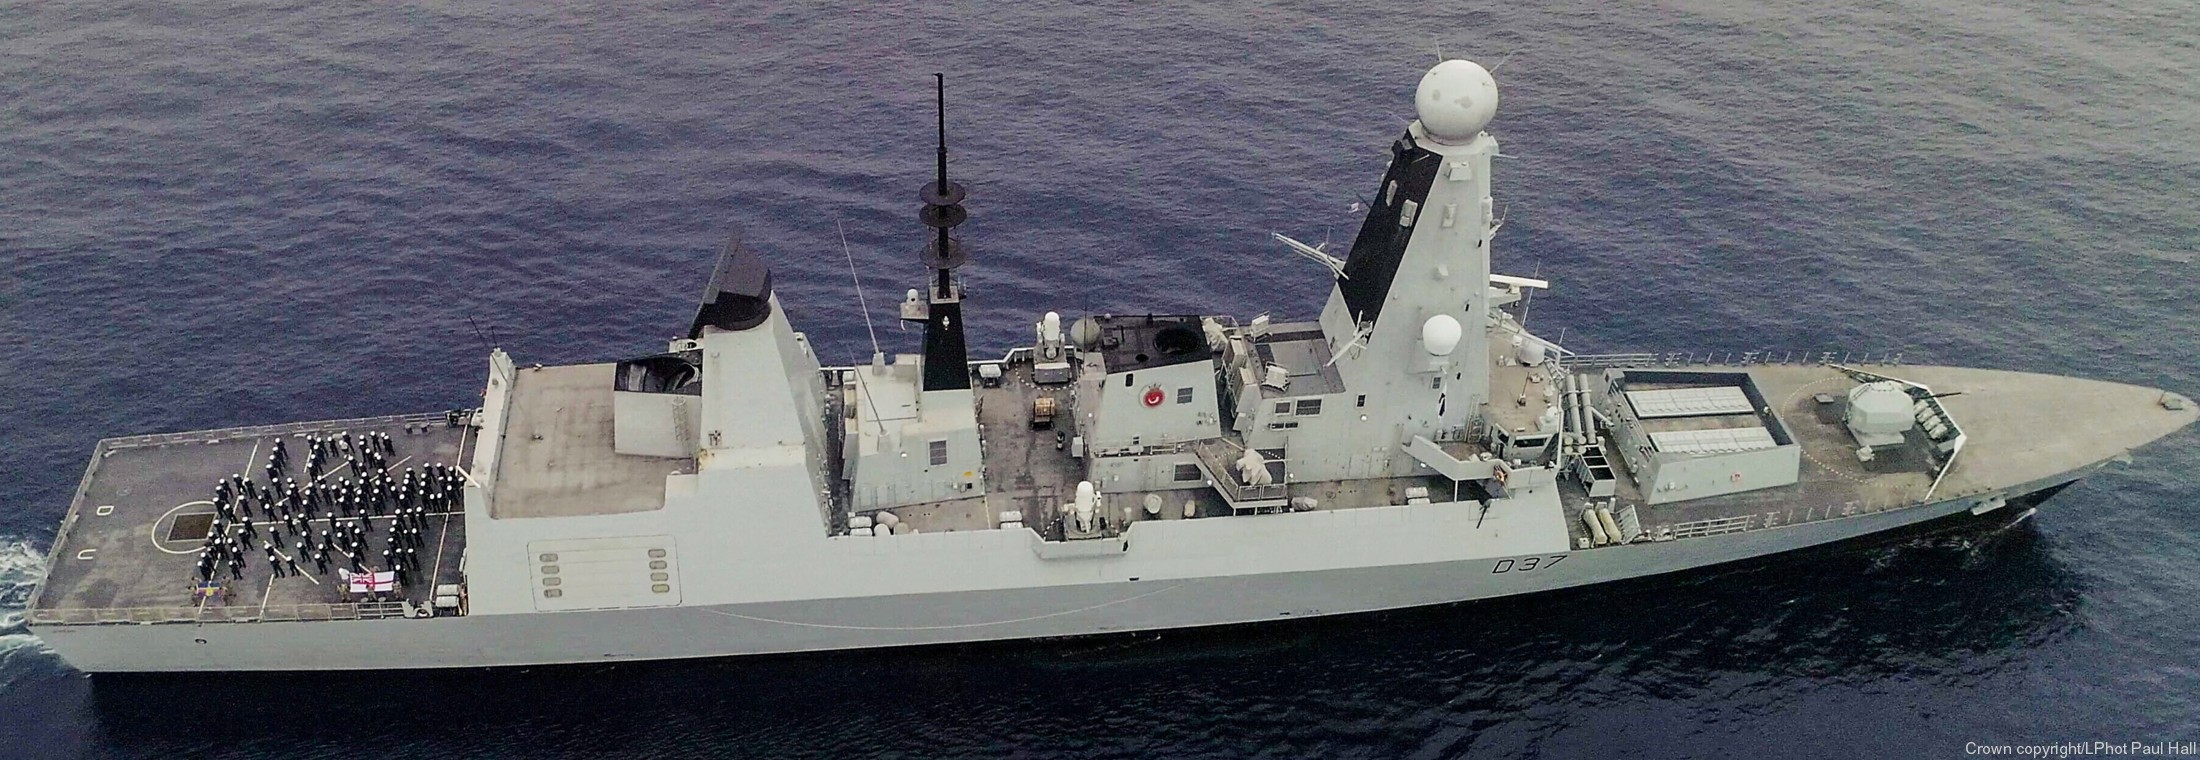 d37 hms duncan d-37 type 45 daring class guided missile destroyer ddg royal navy sea viper 53